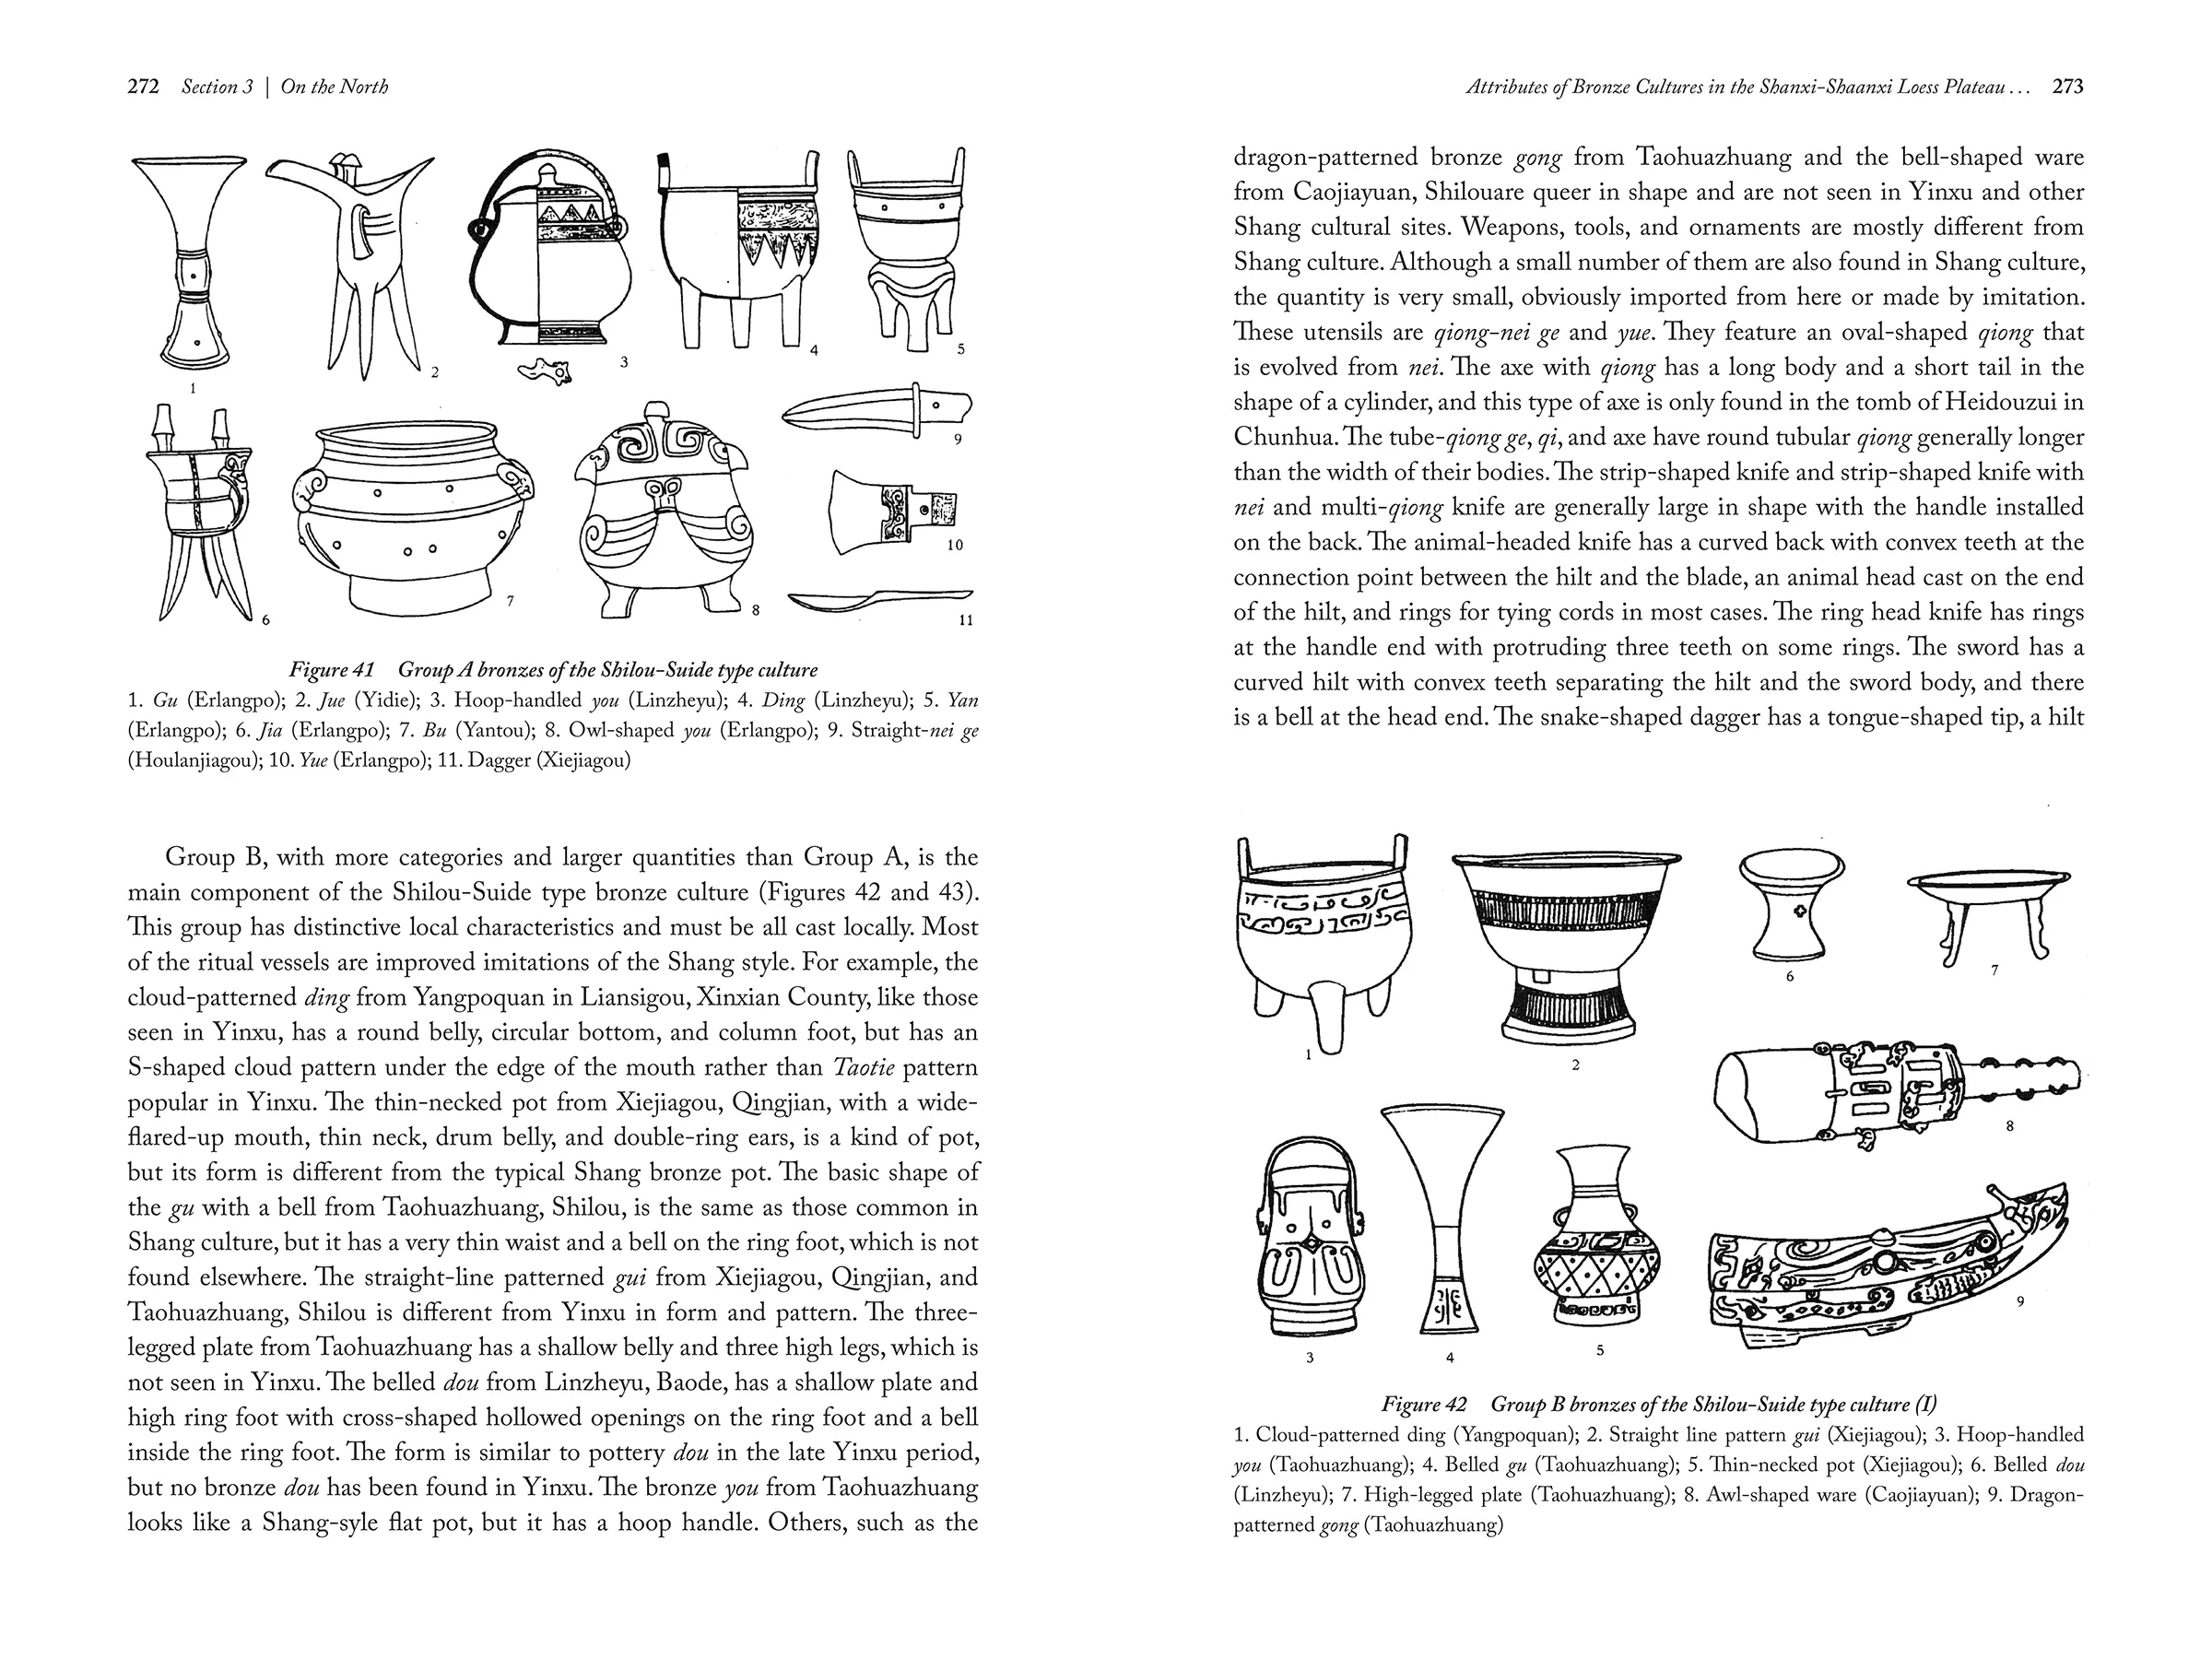 Studies on the Structure and Lineage of Chinese Bronze Cultures_INT_03 copy